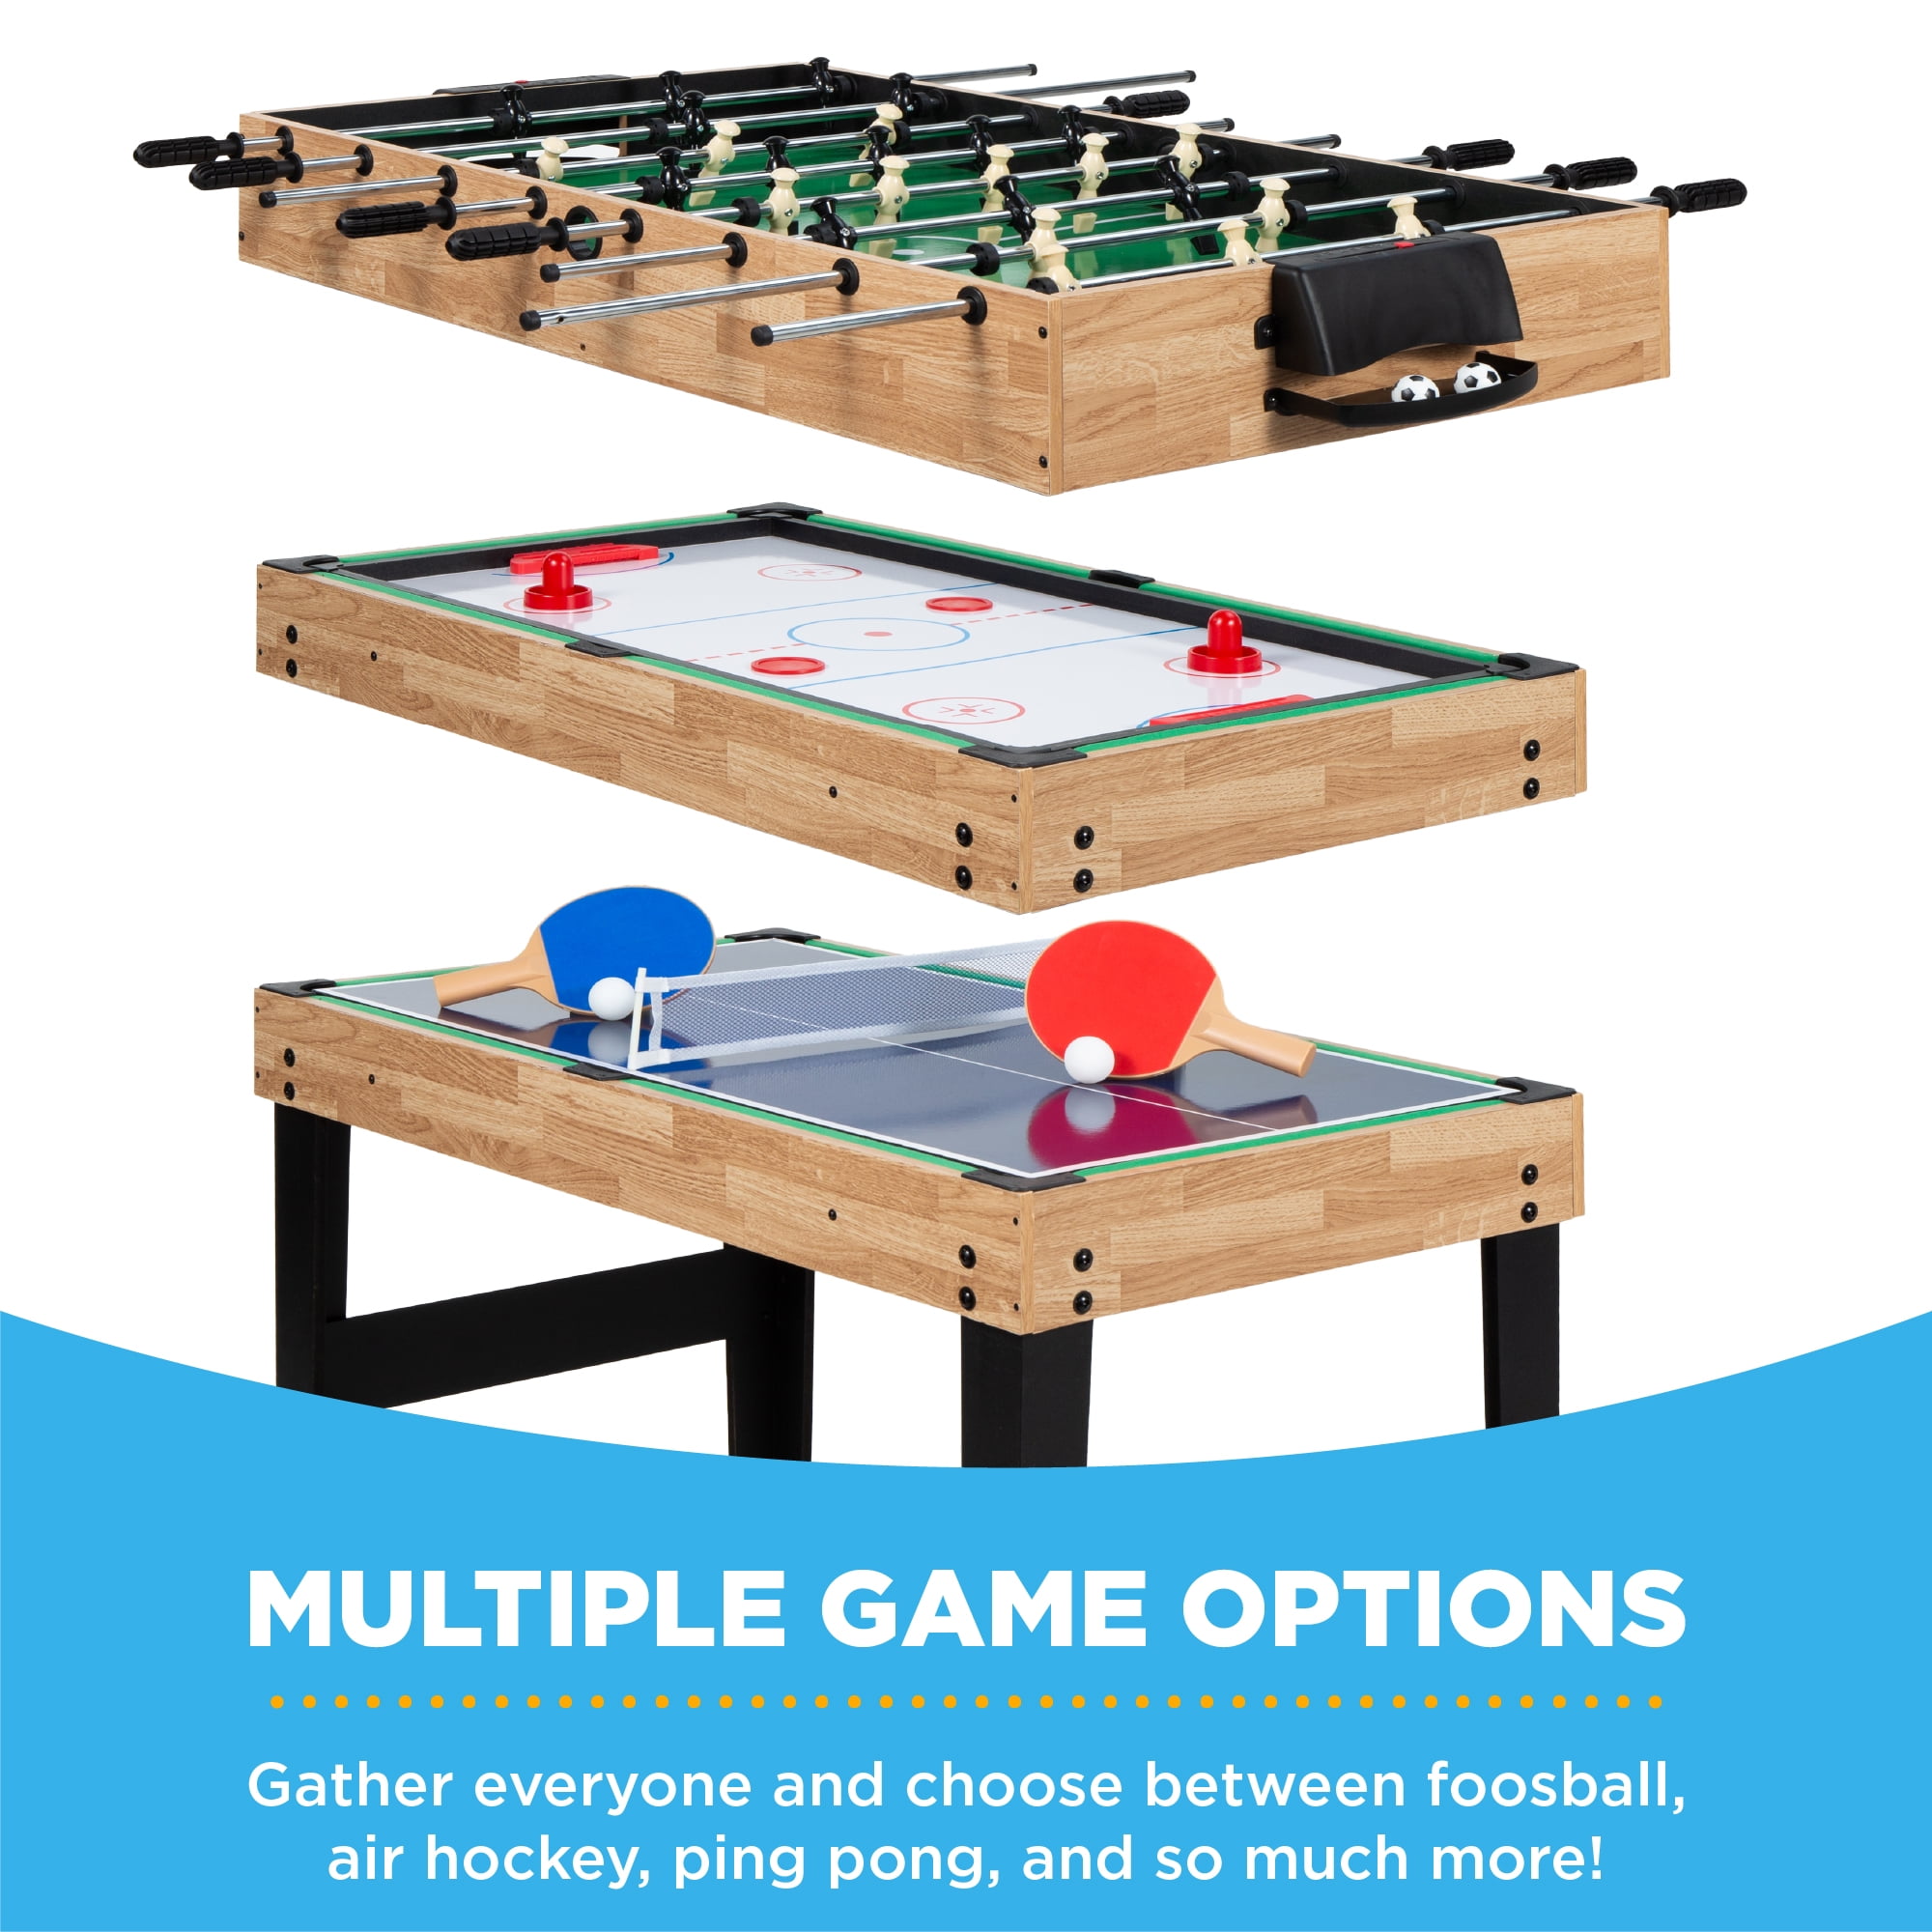 Table Tennis Adult Size Combo Game Table W/ Foosball Pool Shuffleboard Chess Checkers Backgammon for Family Game Night Goplus 10-in-1 Combination Multi Game Table Set Bowling 